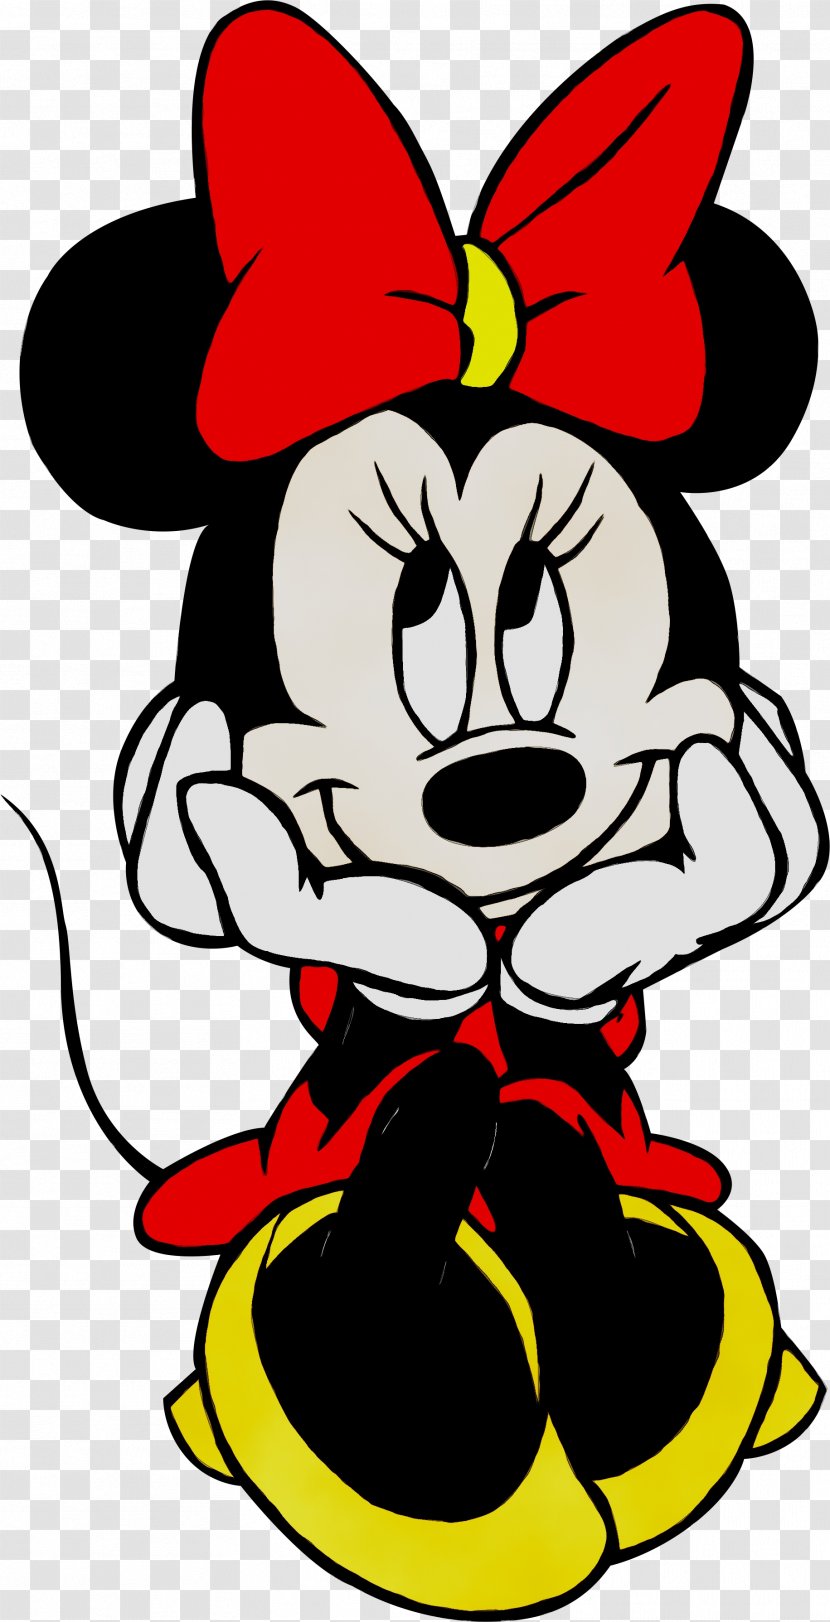 Mickey Mouse Minnie The Walt Disney Company Donald Duck Image Transparent PNG